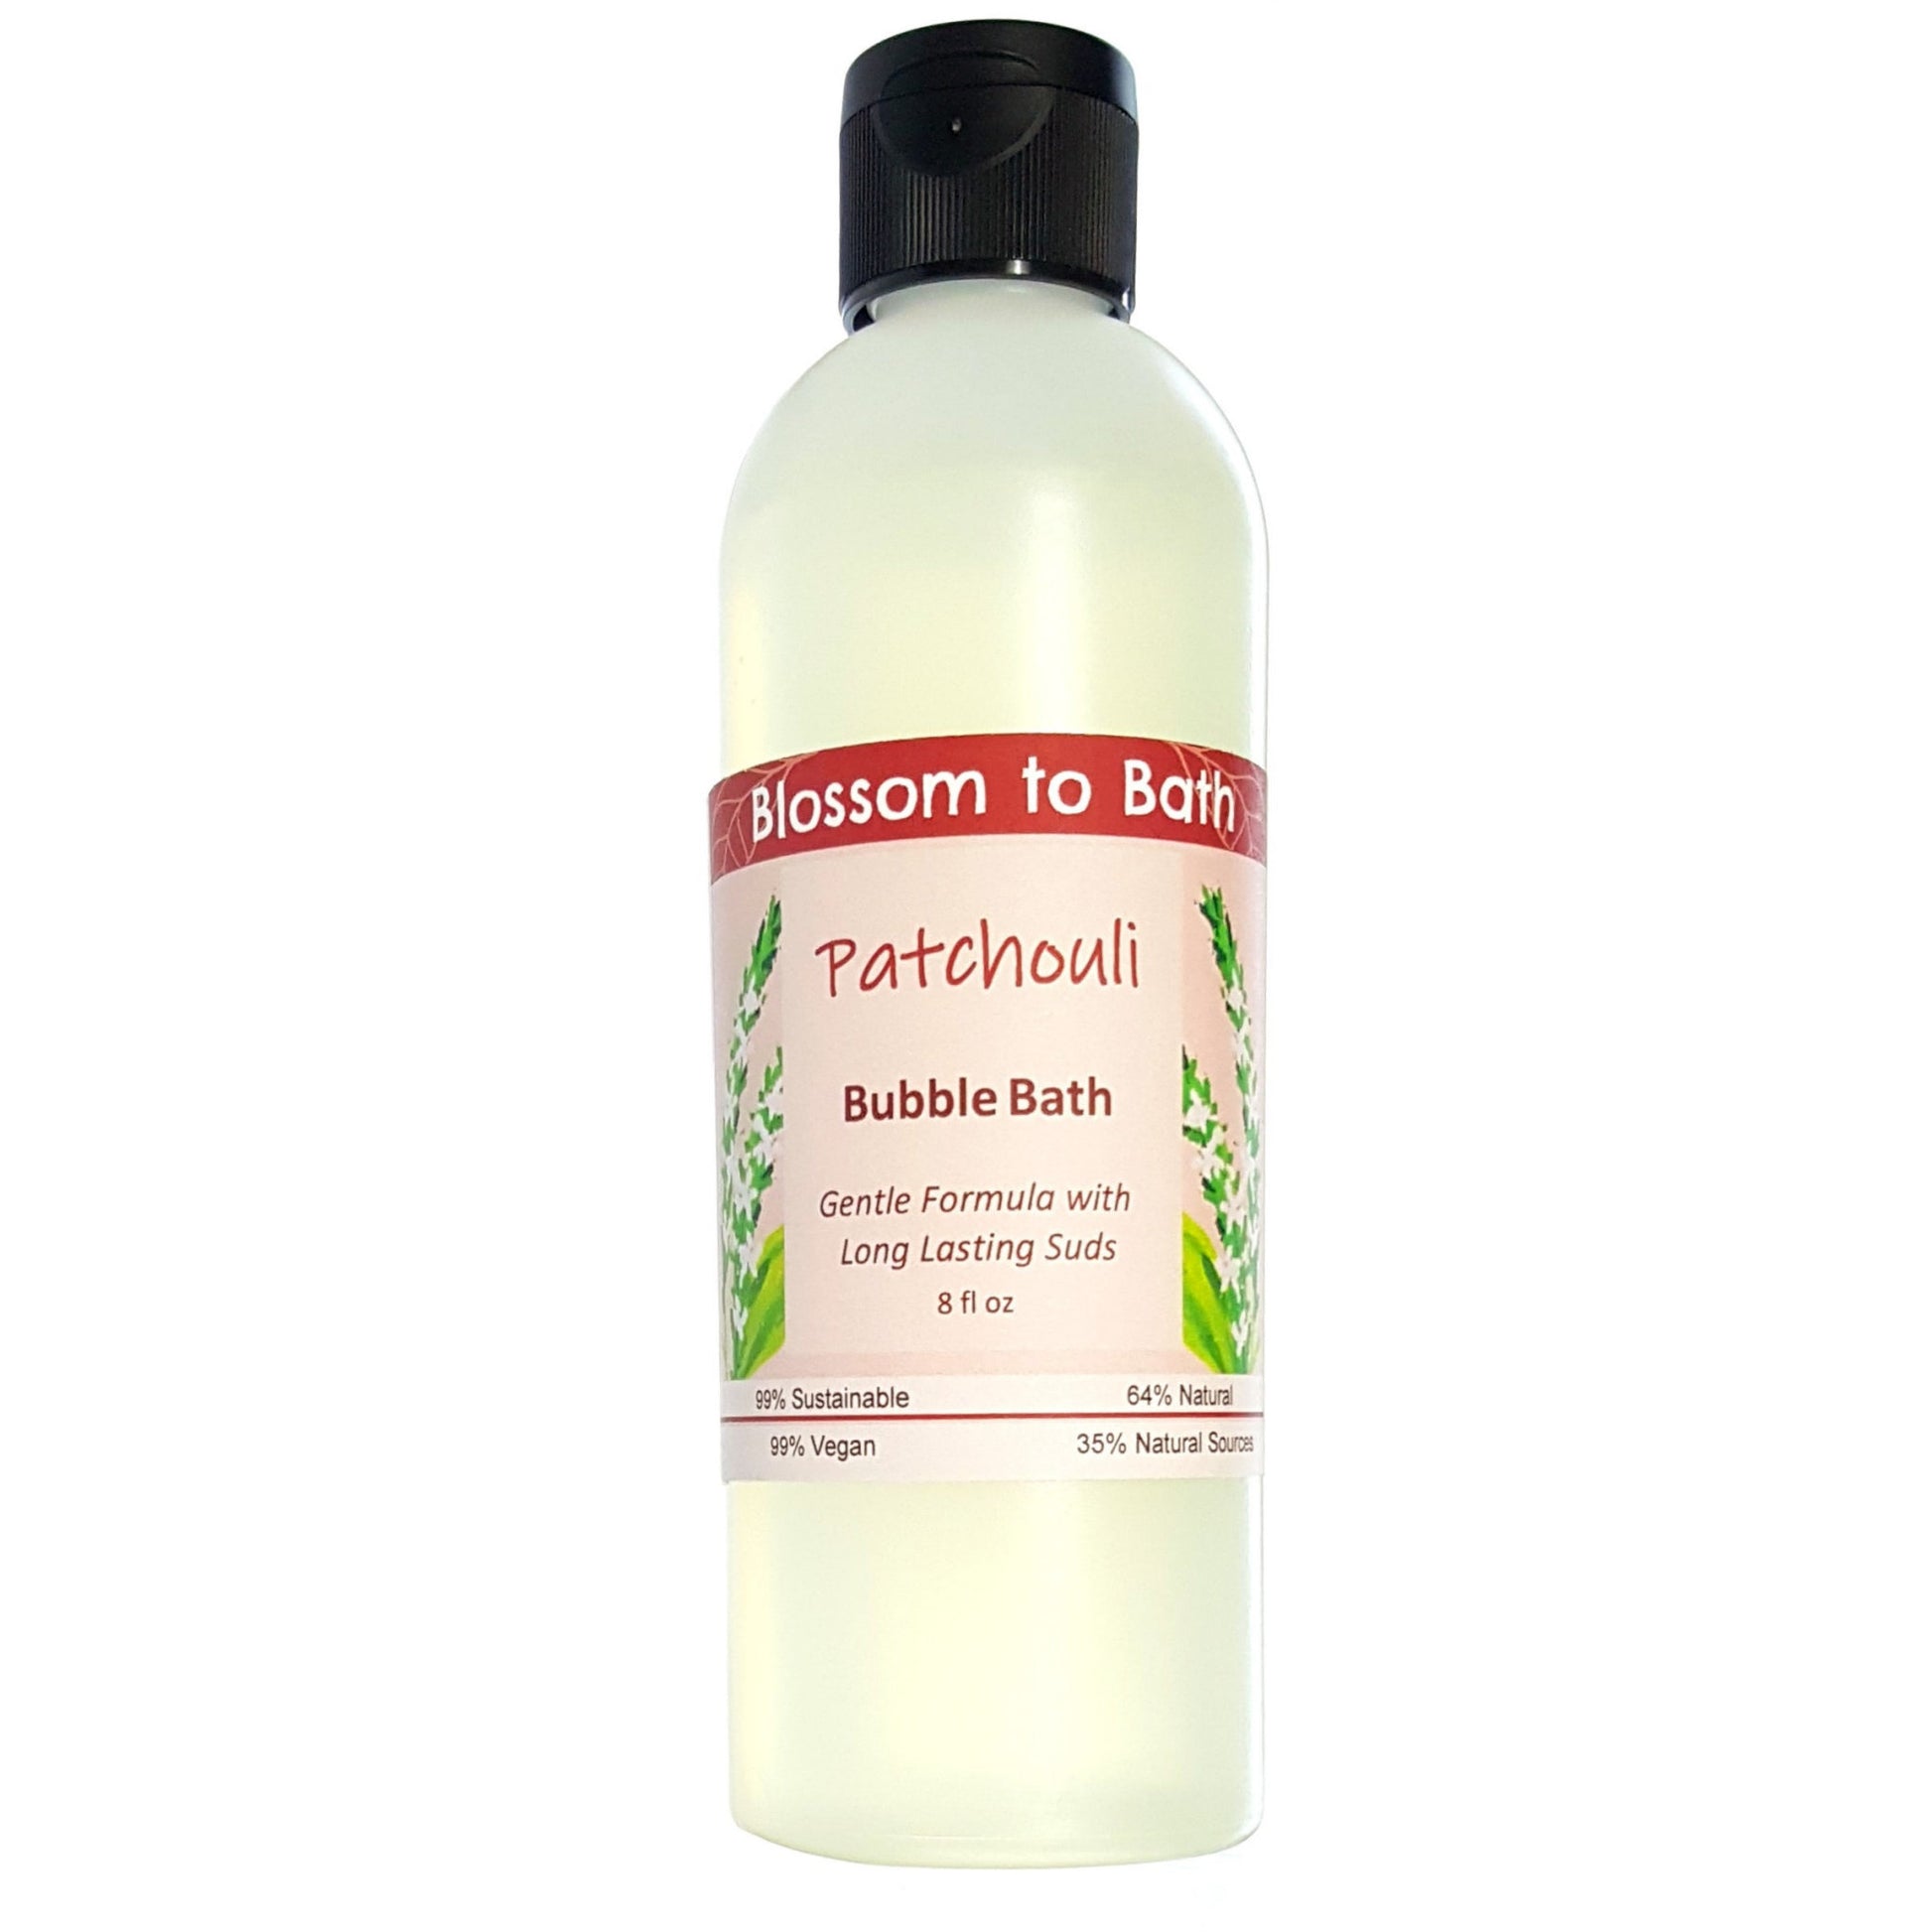 Buy Blossom to Bath Patchouli Bubble Bath from Flowersong Soap Studio.  Lively, long lasting luxury bubbles in a gentle plant based formula for maximum relaxation time  The pure earthy, woody, spicy scent of straight Patchouli.